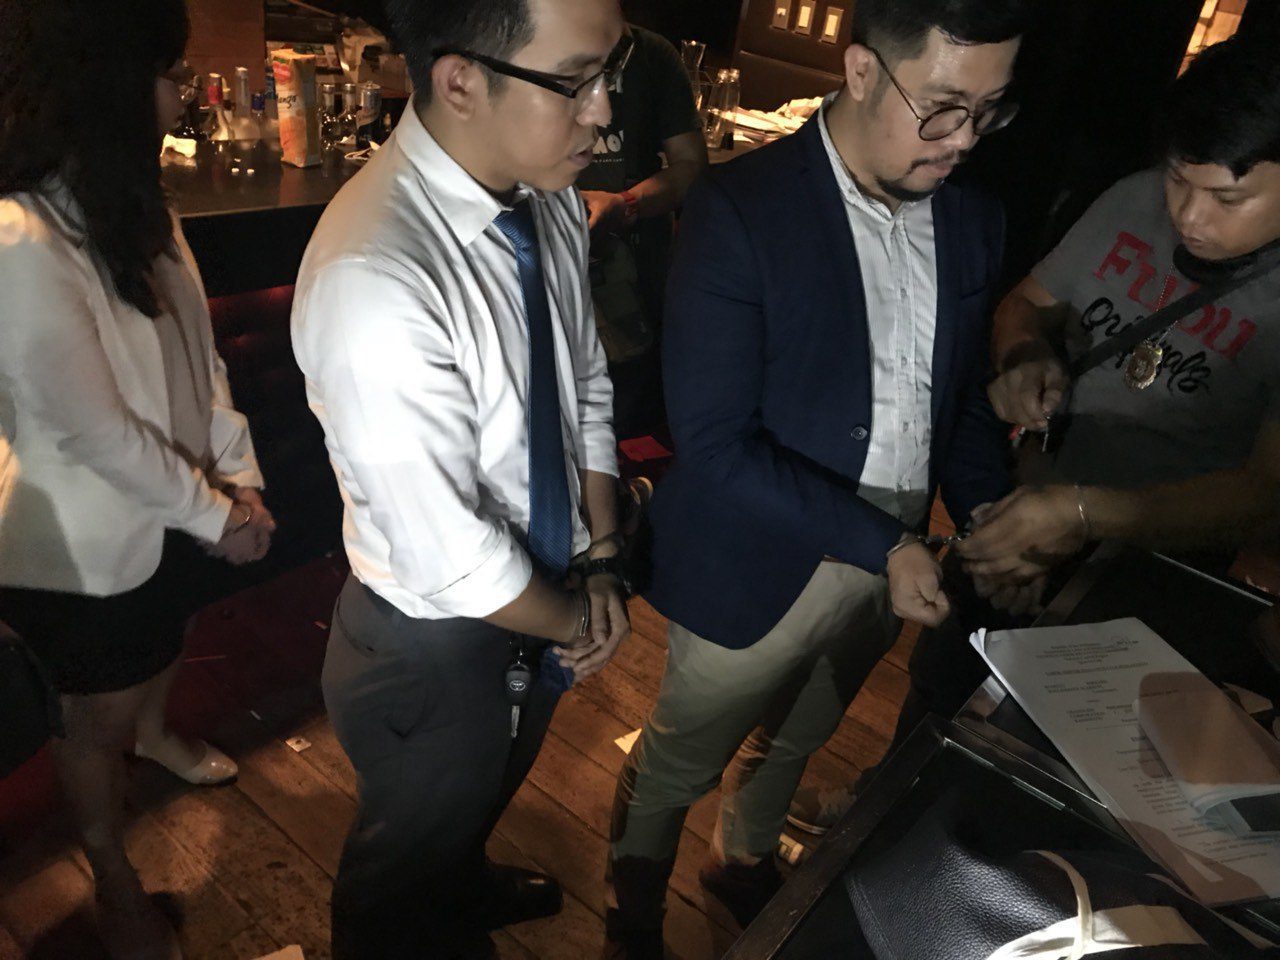 Arrest of lawyers in Makati bar ‘very grave cause for concern’ – IBP